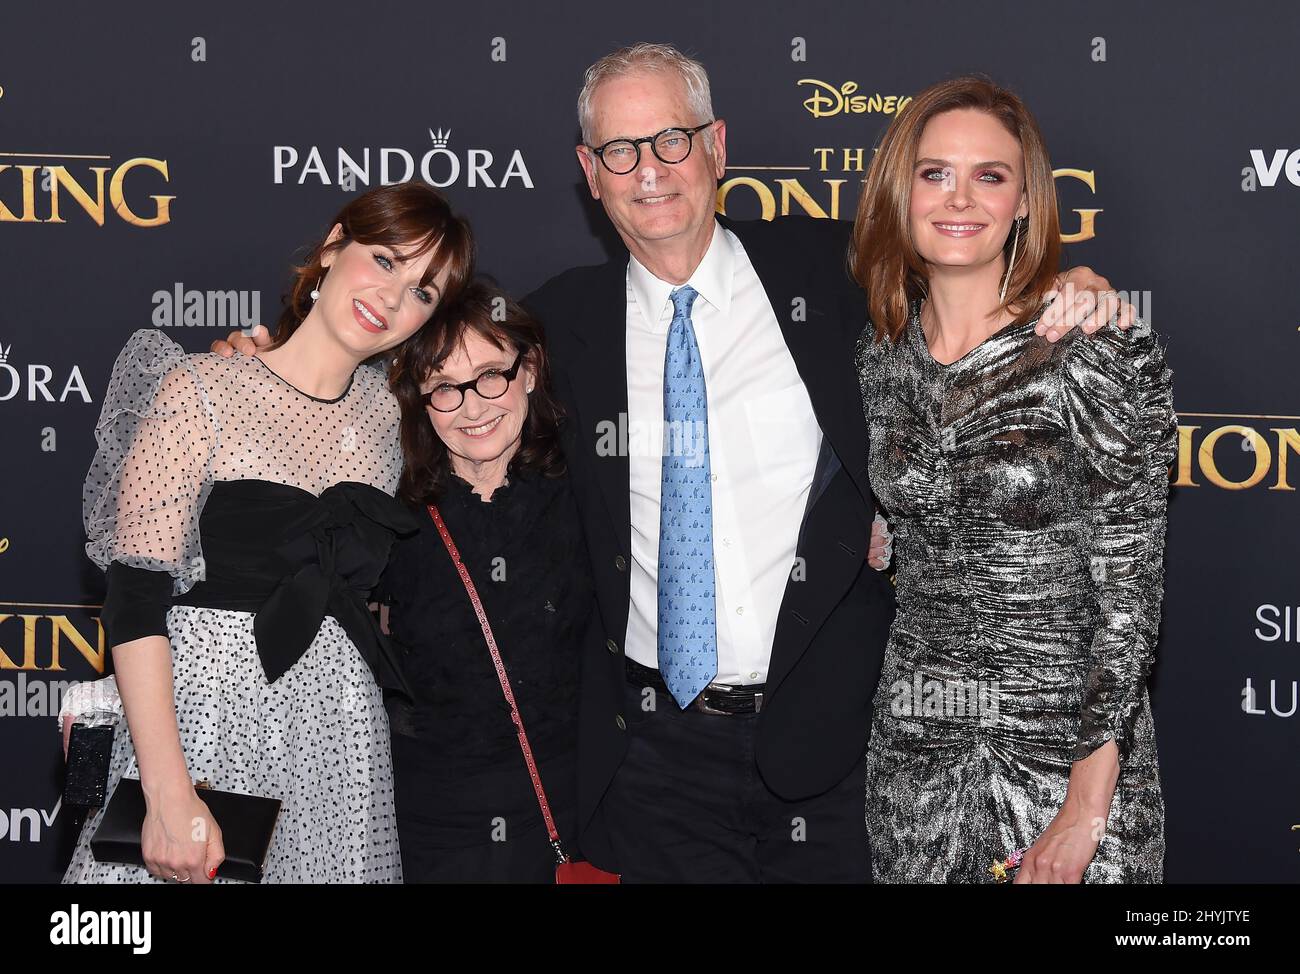 Mary Jo Deschanel, Zooey Deschanel, Emily Deschanel and Caleb Deschanel at 'The Lion King' world premiere held at the Dolby Theatre on July 9, 2019 in Hollywood, CA. Stock Photo